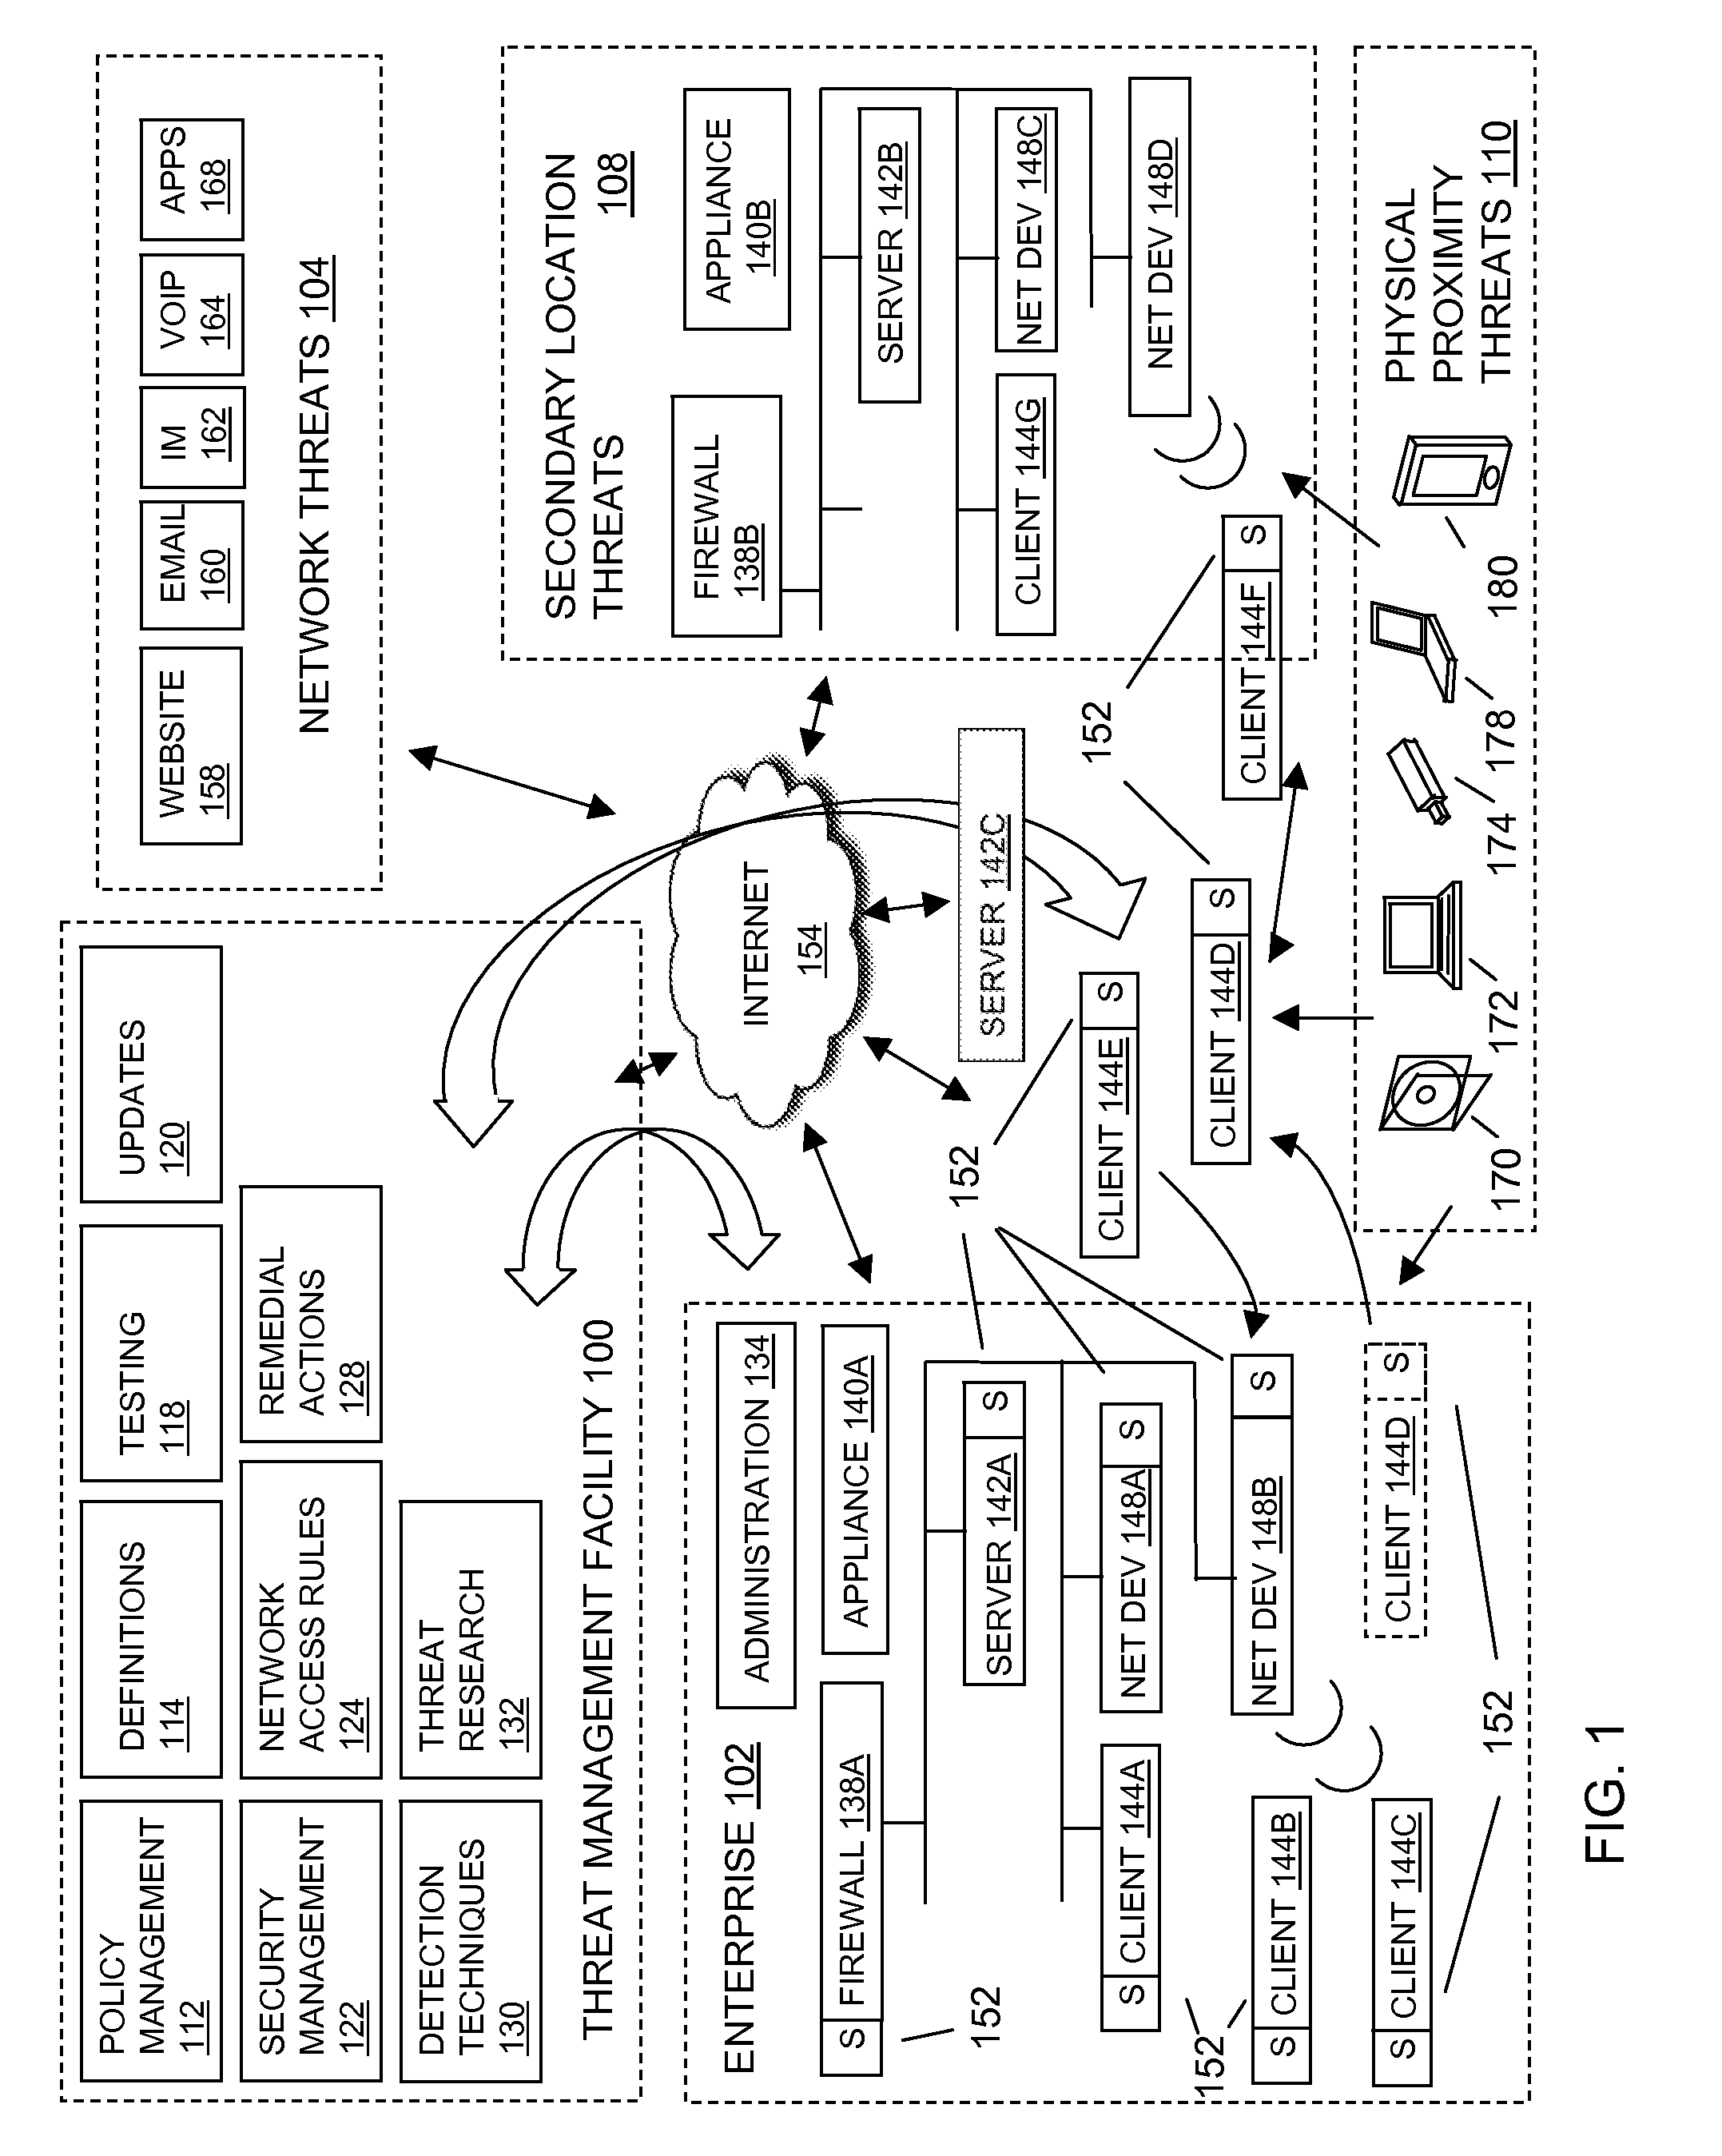 System and method for identifying unauthorized endpoints